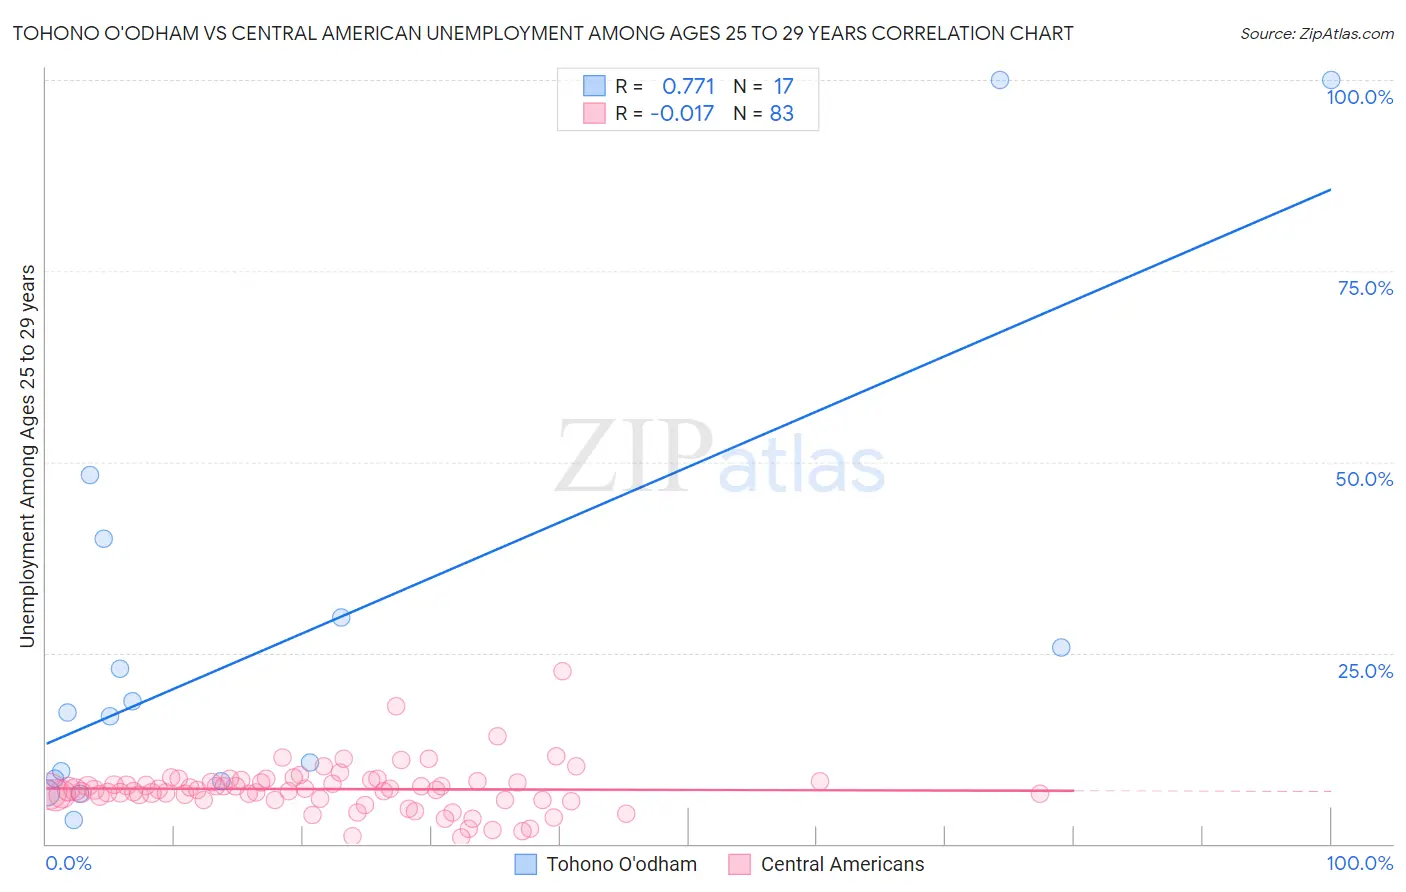 Tohono O'odham vs Central American Unemployment Among Ages 25 to 29 years